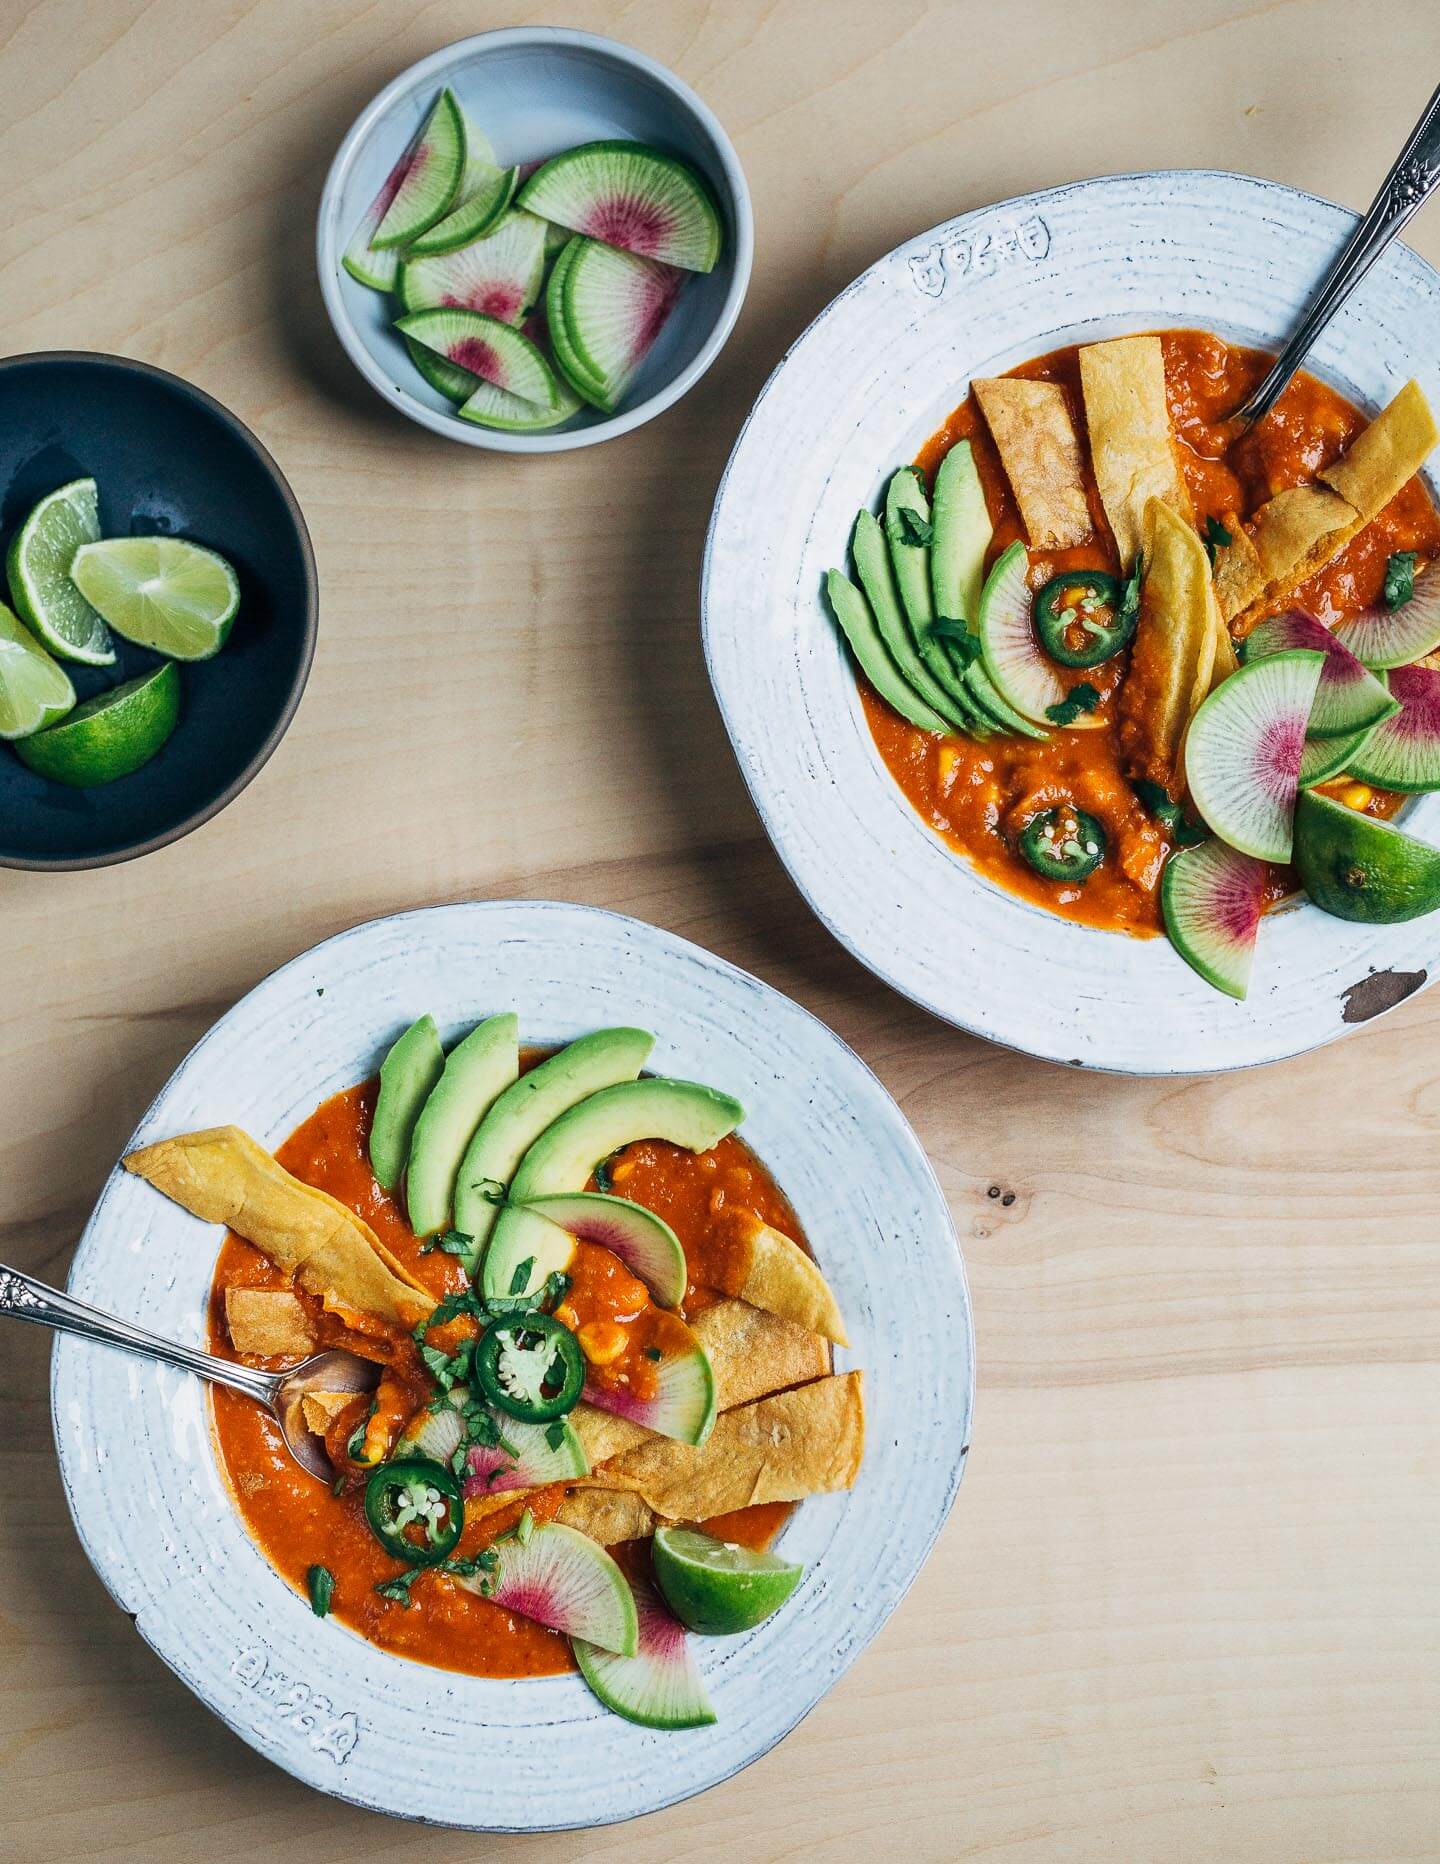 A hearty, spicy plant-based tortilla soup that's perfect for chilly winter days.